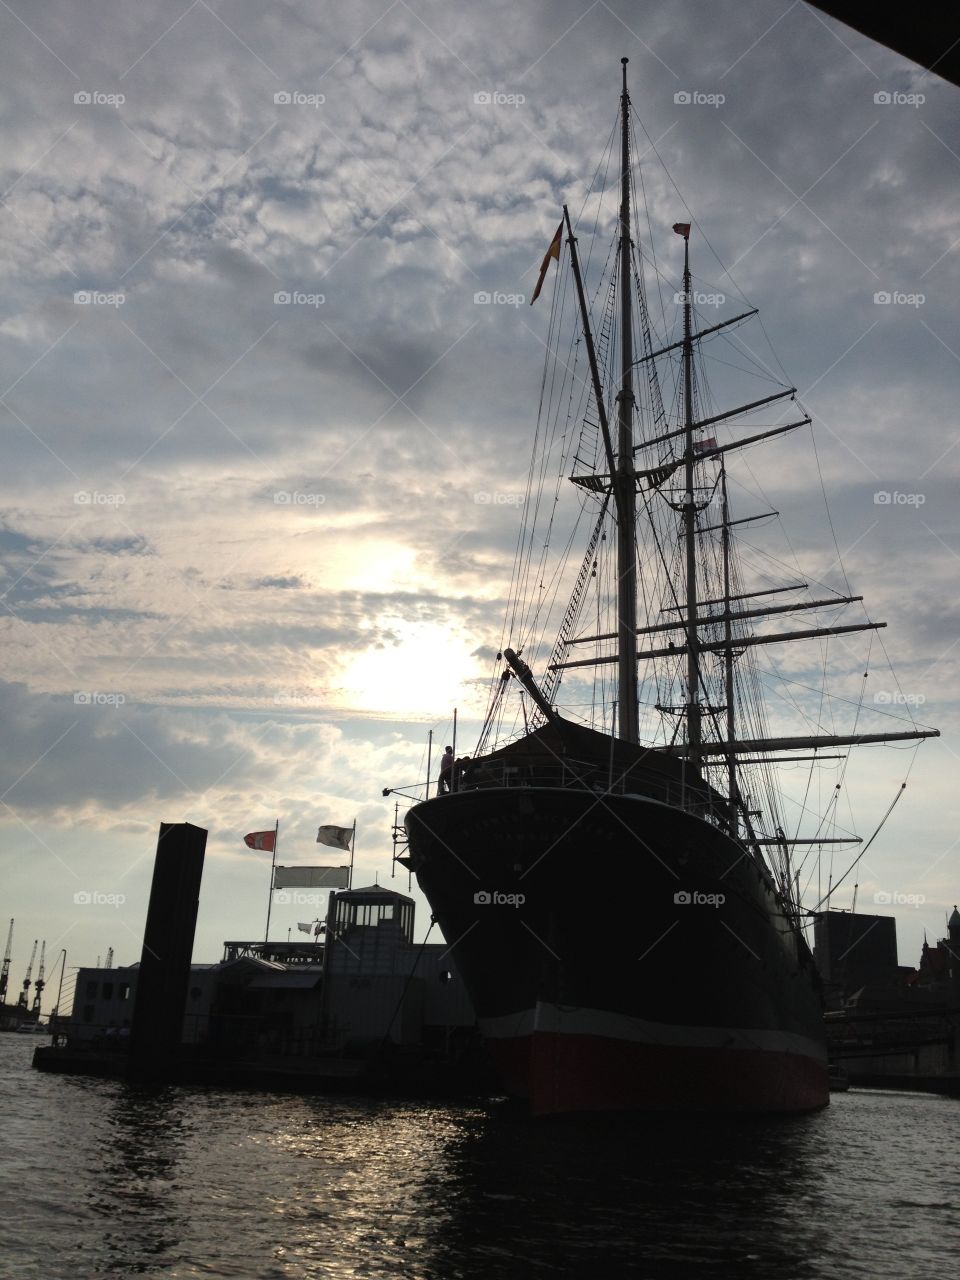 The silhouette of a ship docked in the harbor of Hamburg, Germany